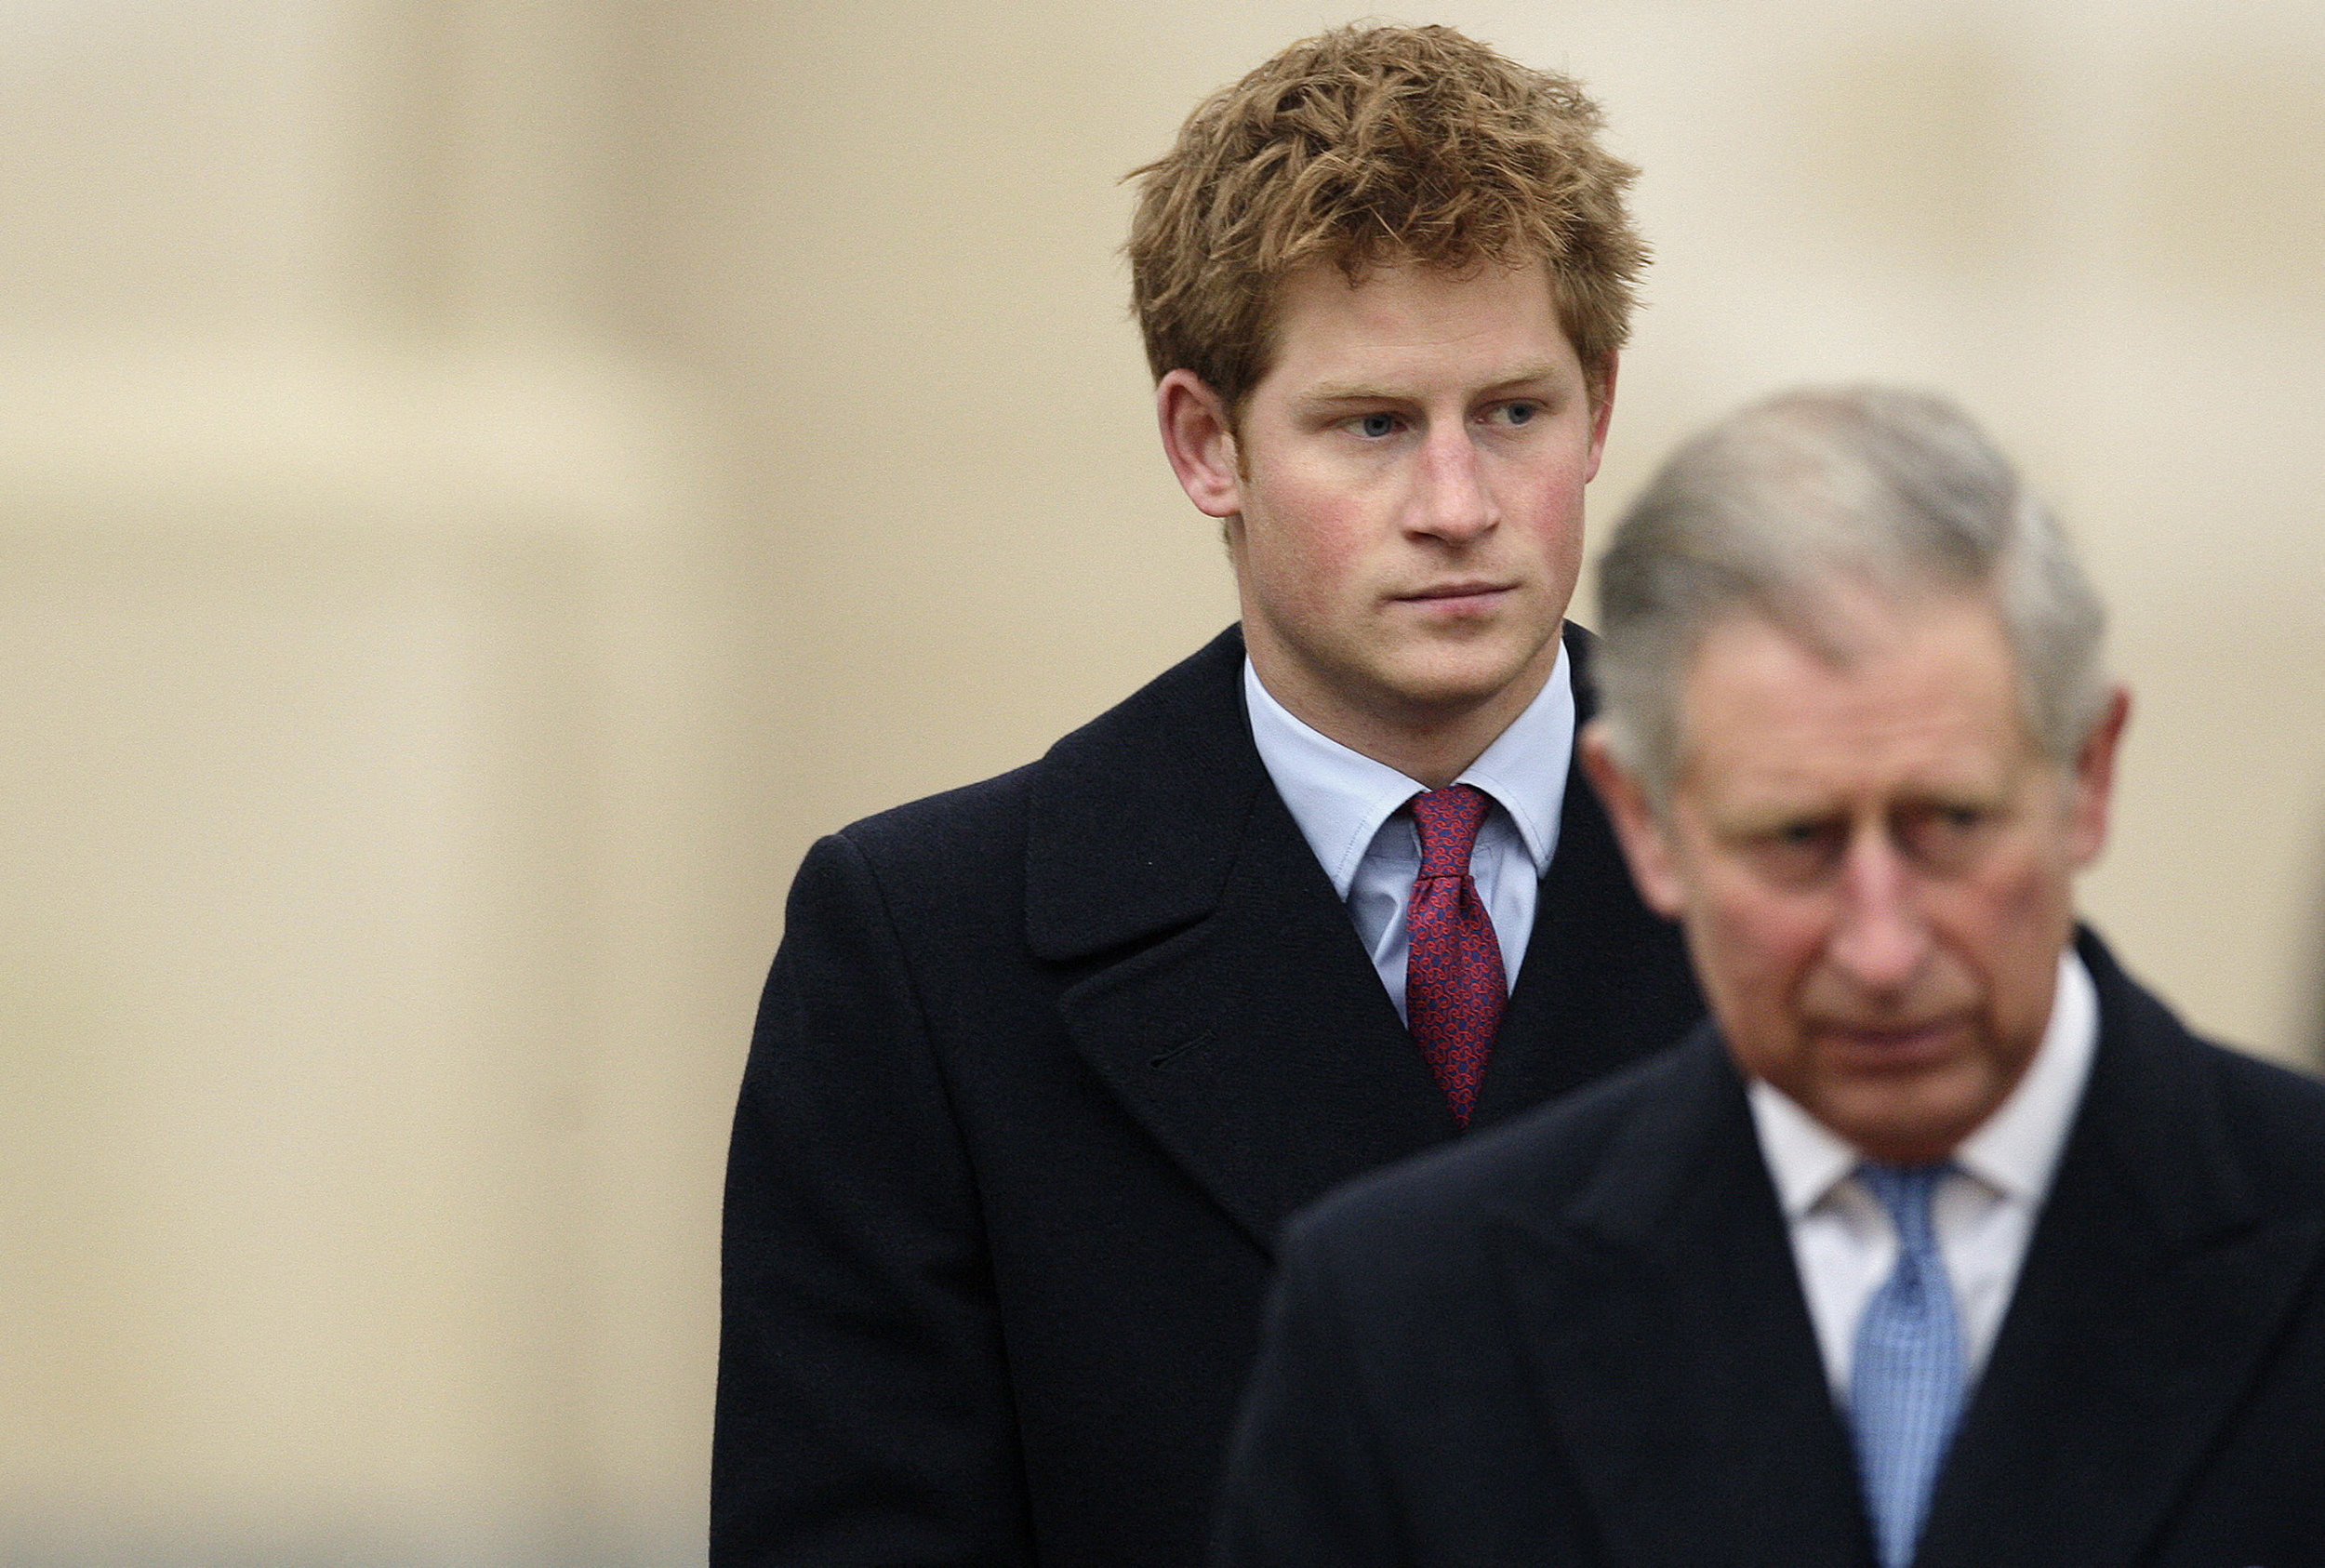 Prince Charles and Prince Harry at an event in honor of the Queen Mother in 2009